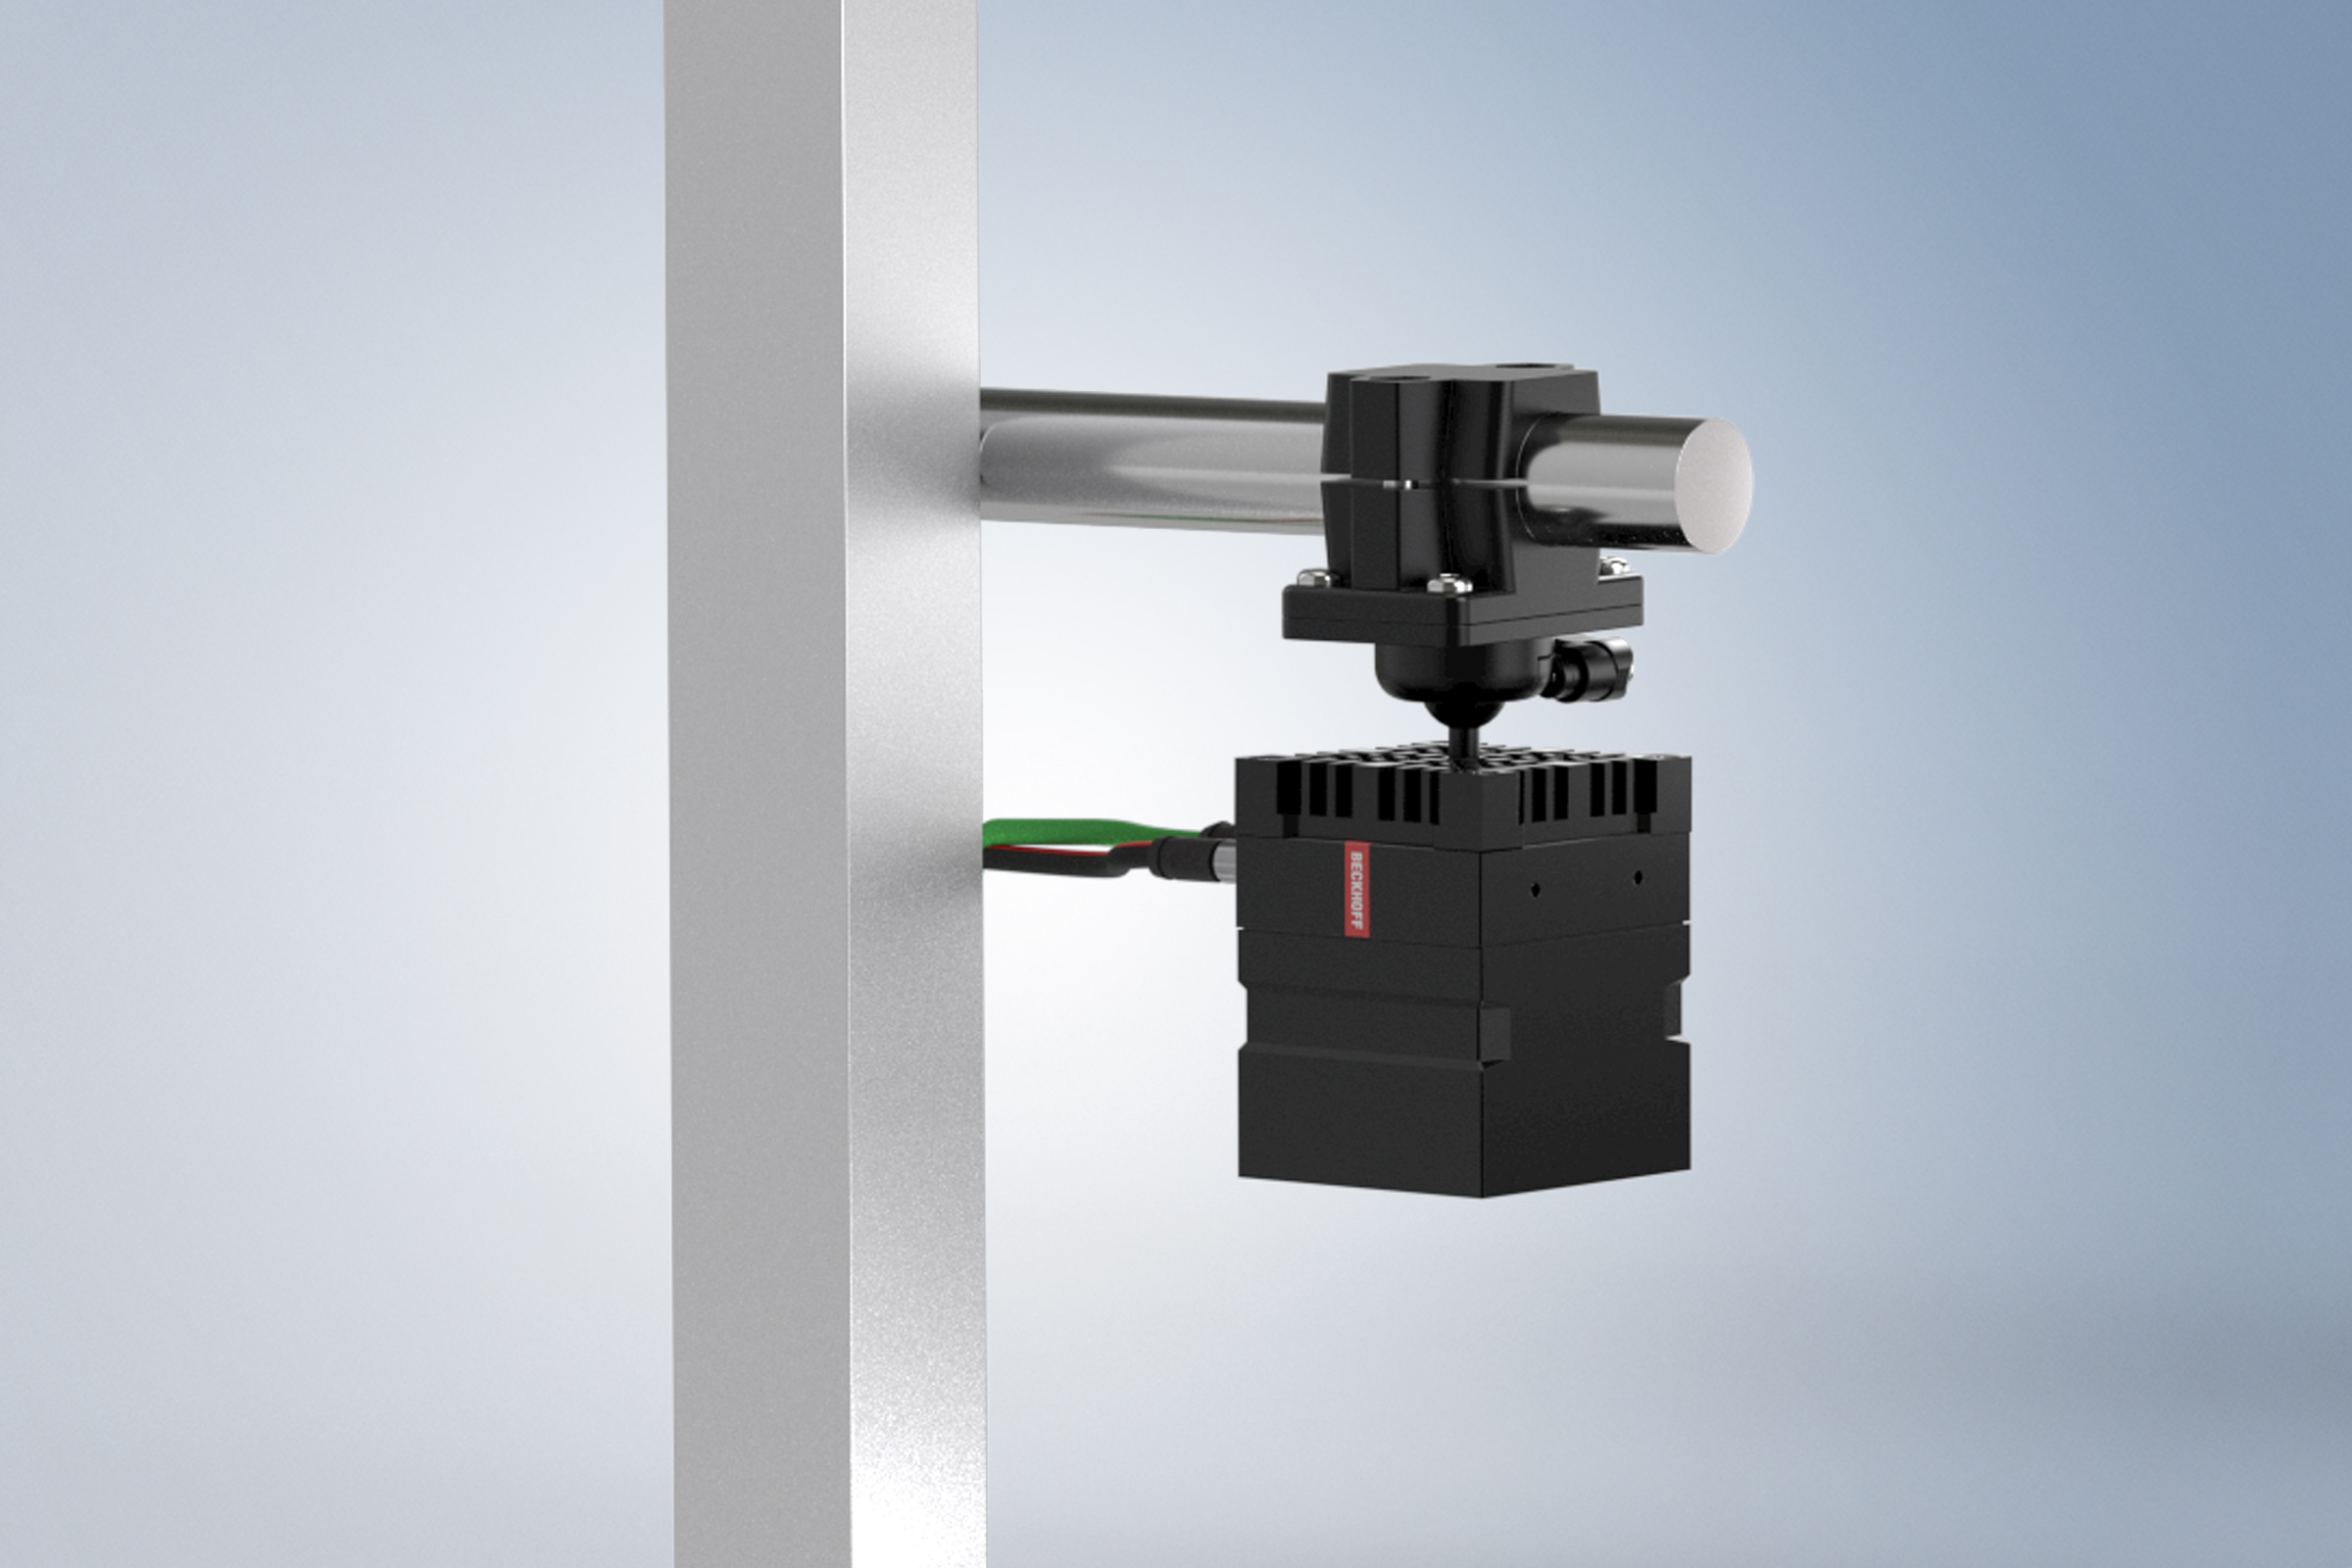 Easy adjustment of the optical axis using the ball head fixture 